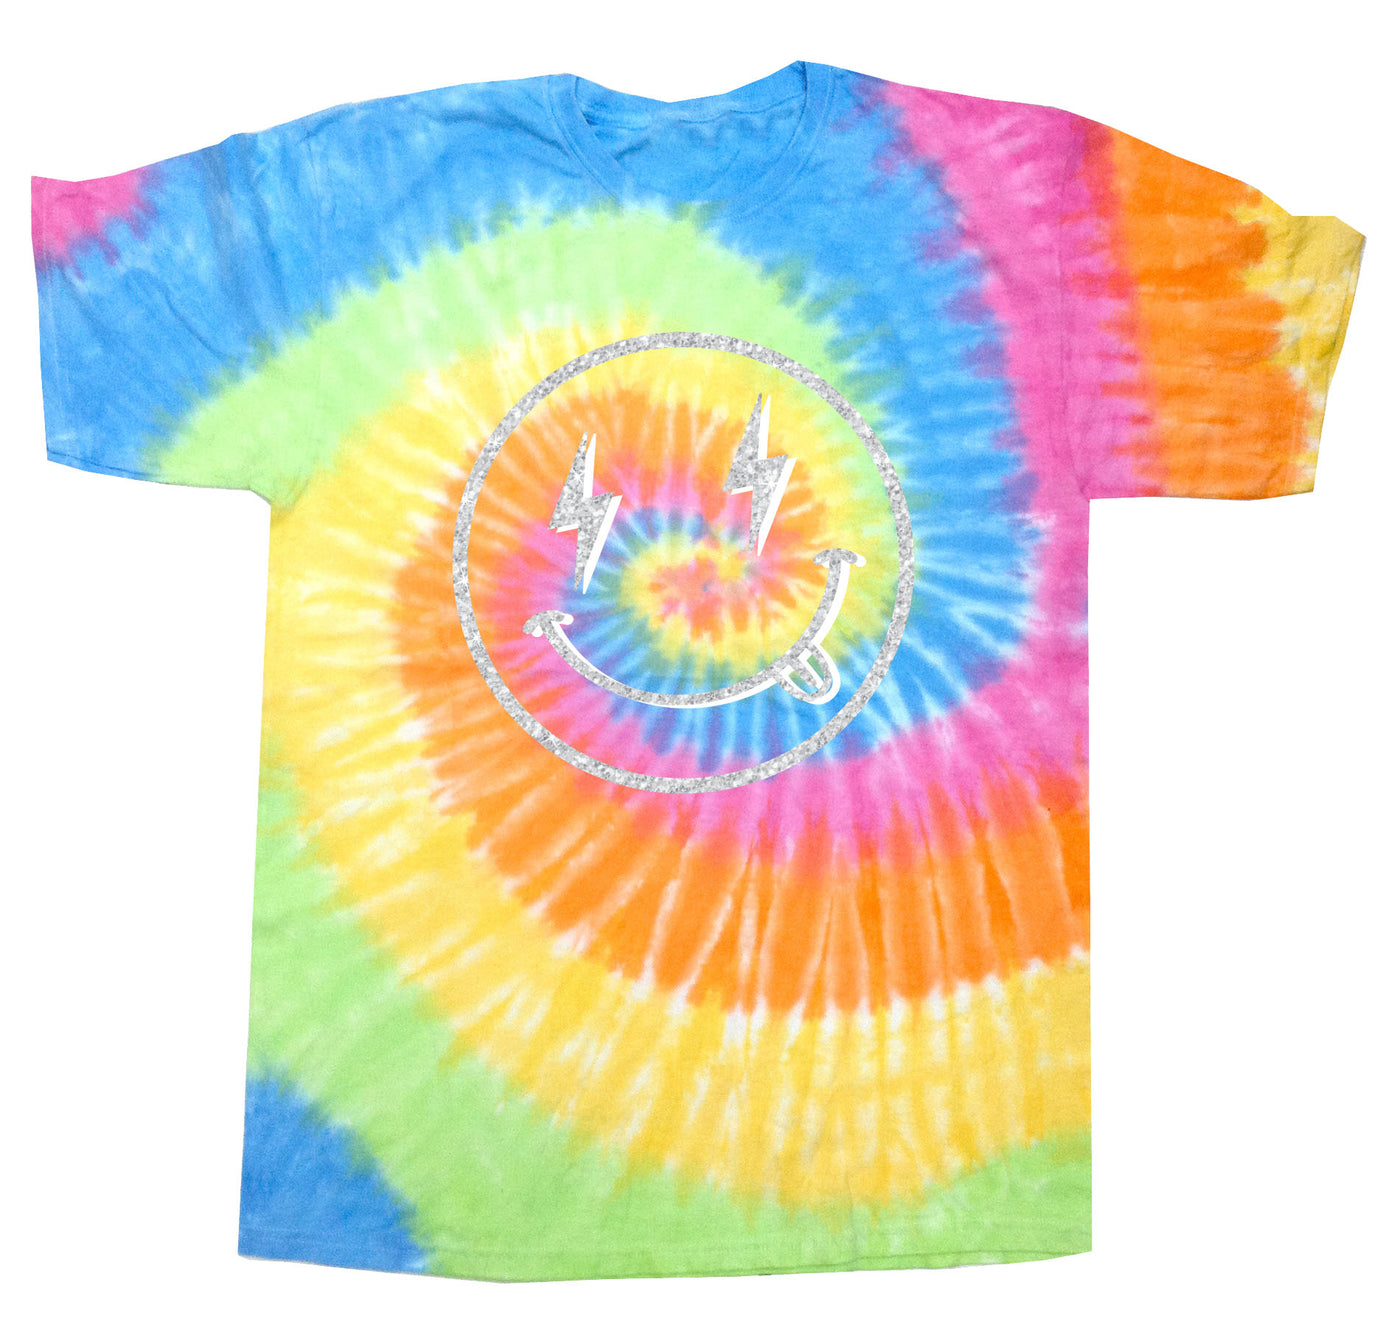 Smiley Face T-Shirt in Tie Dye Eternity with silver glitter